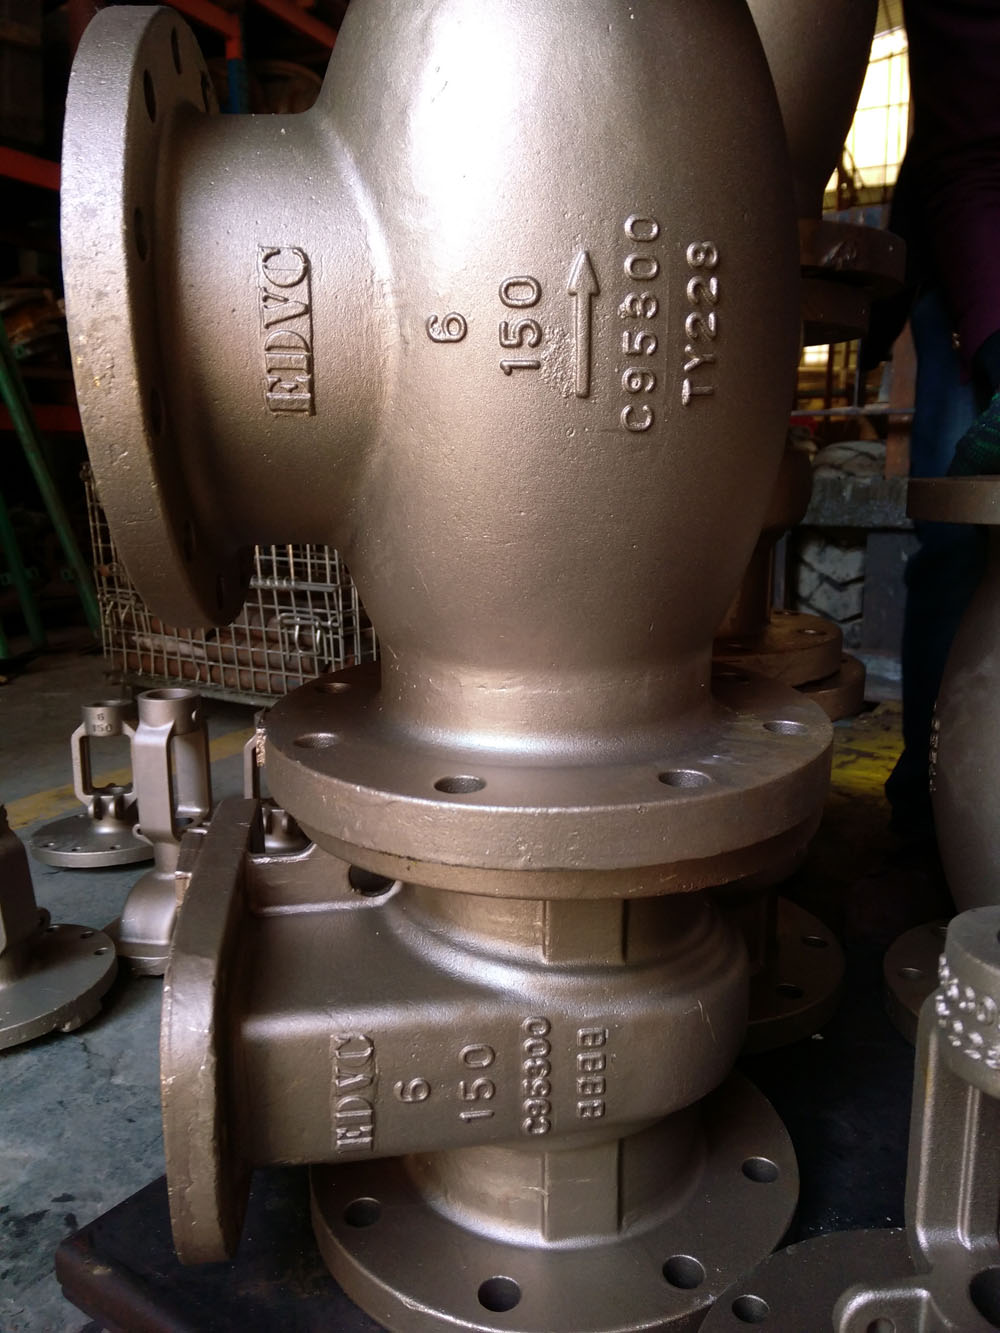 EDVC Of Aluminum Bronze Valve Took a Lead in offshore project abtain success for Chinese valve manufactuers 